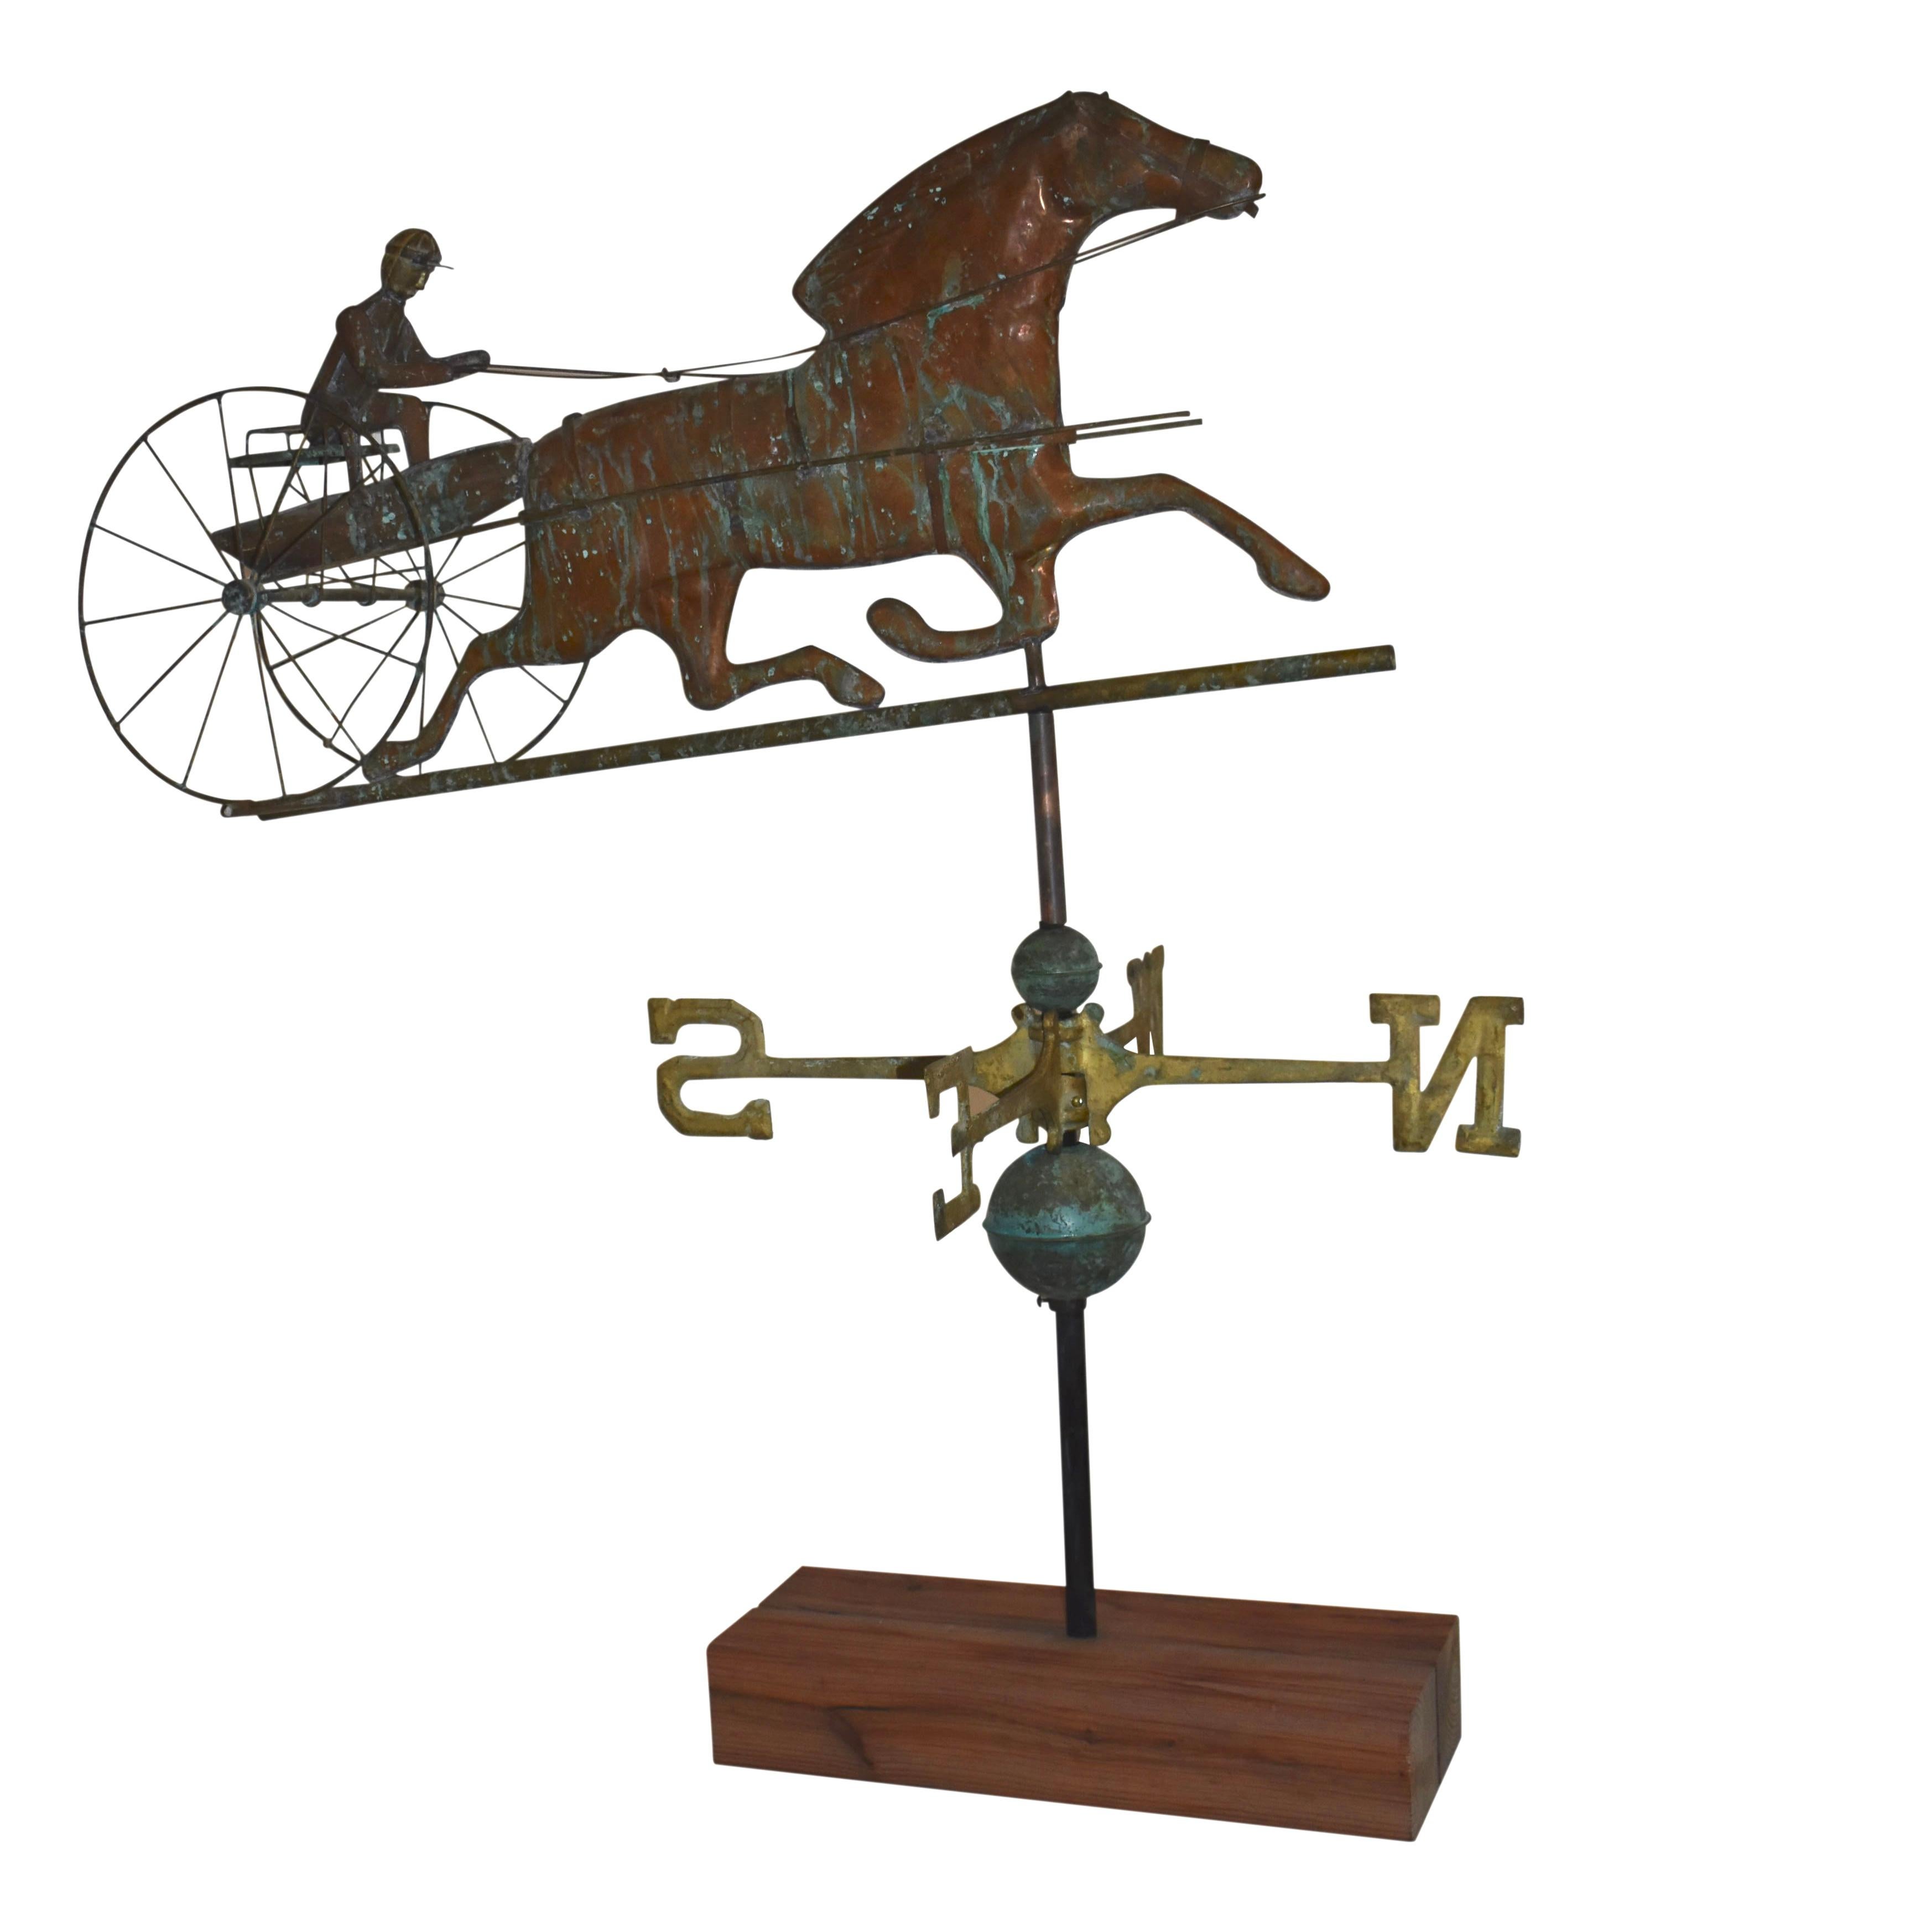 Crafted from copper and brass with verdigris from exposure to the elements, this weathervane features a horse pulling a gentleman in a sulky with classic N, W, S, and E directionals. The dimensions of the figure are 34 x 9.5 x 14.5 inches. Each